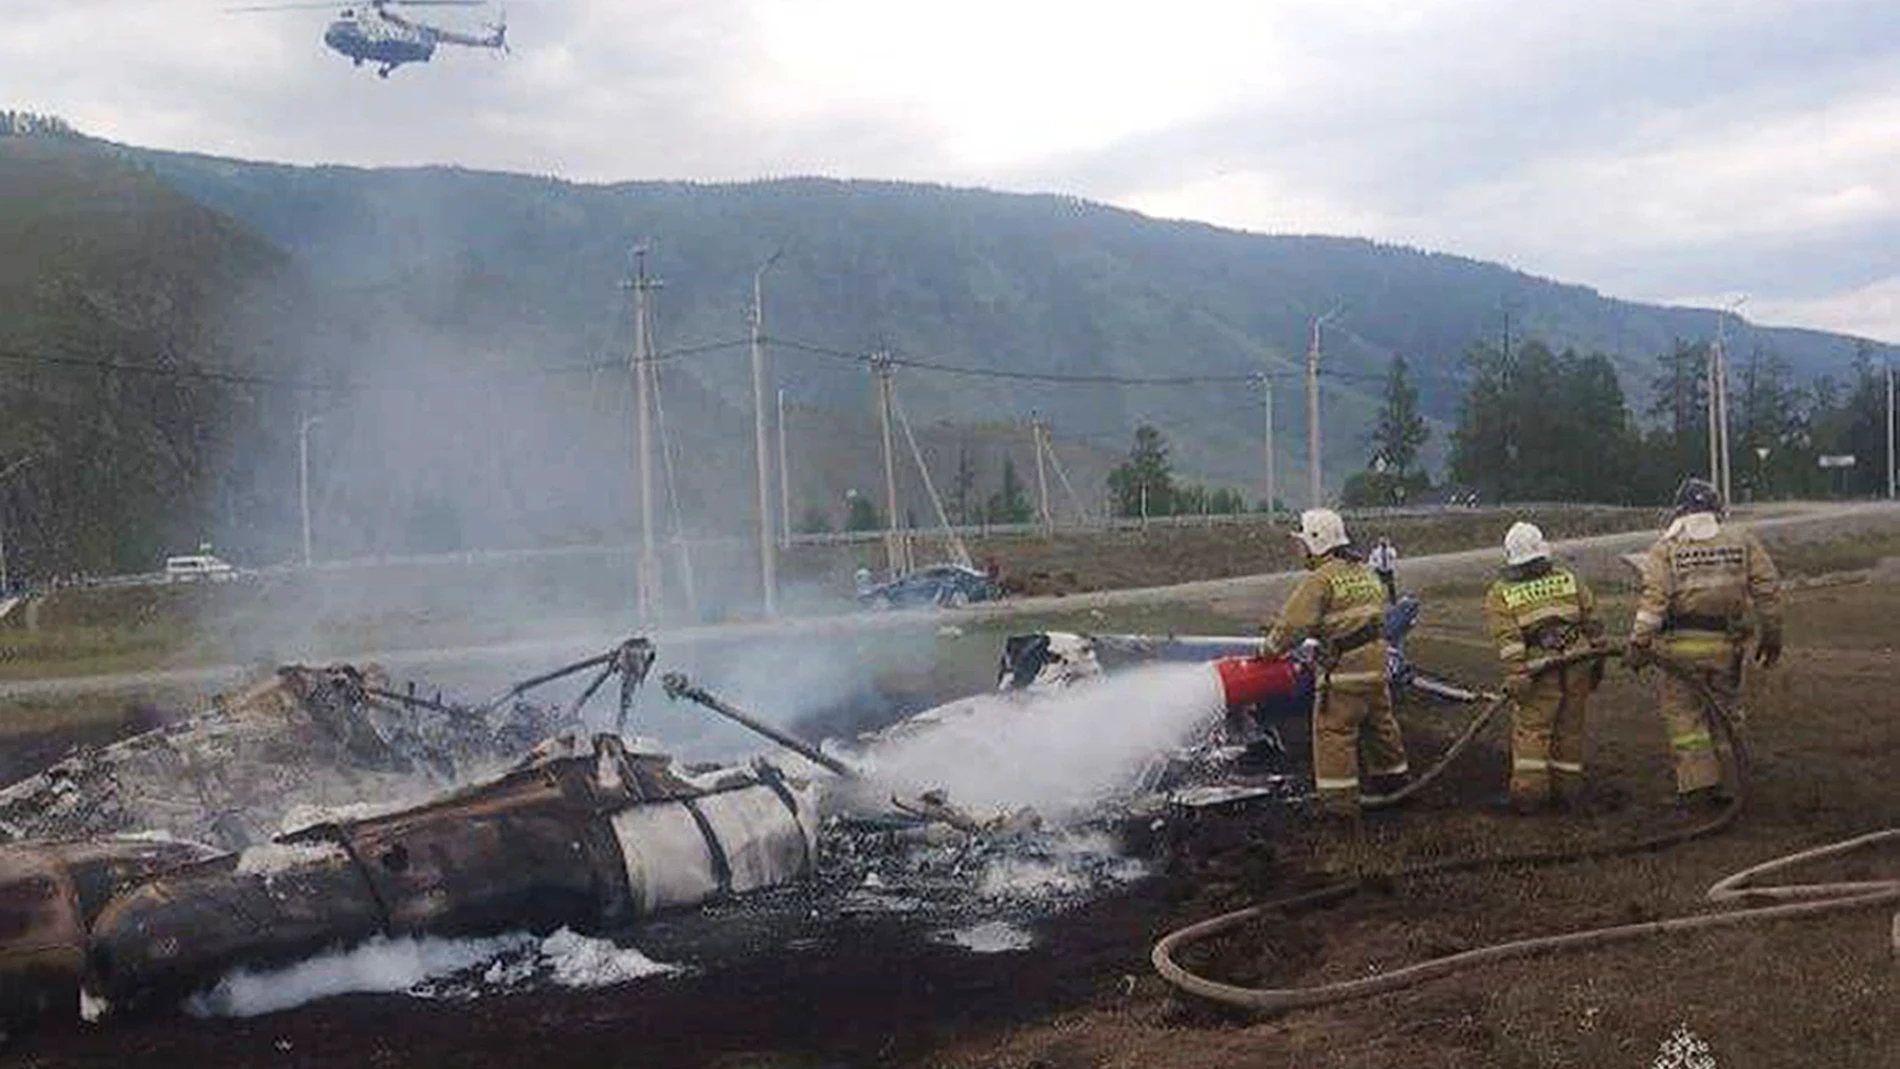 In this image provided by Russian Emergency Situations Ministry press service, firefighters extinguish a Mi-8 helicopter after the crash near Tyungur village, Altai Republic in southern Siberia, Russia, Thursday, July 27, 2023. A helicopter crashed in Russia's Siberia on Thursday, killing six of those on board and injuring seven, Russian emergency officials reported. (Ministry of Emergency Situations press service via AP)